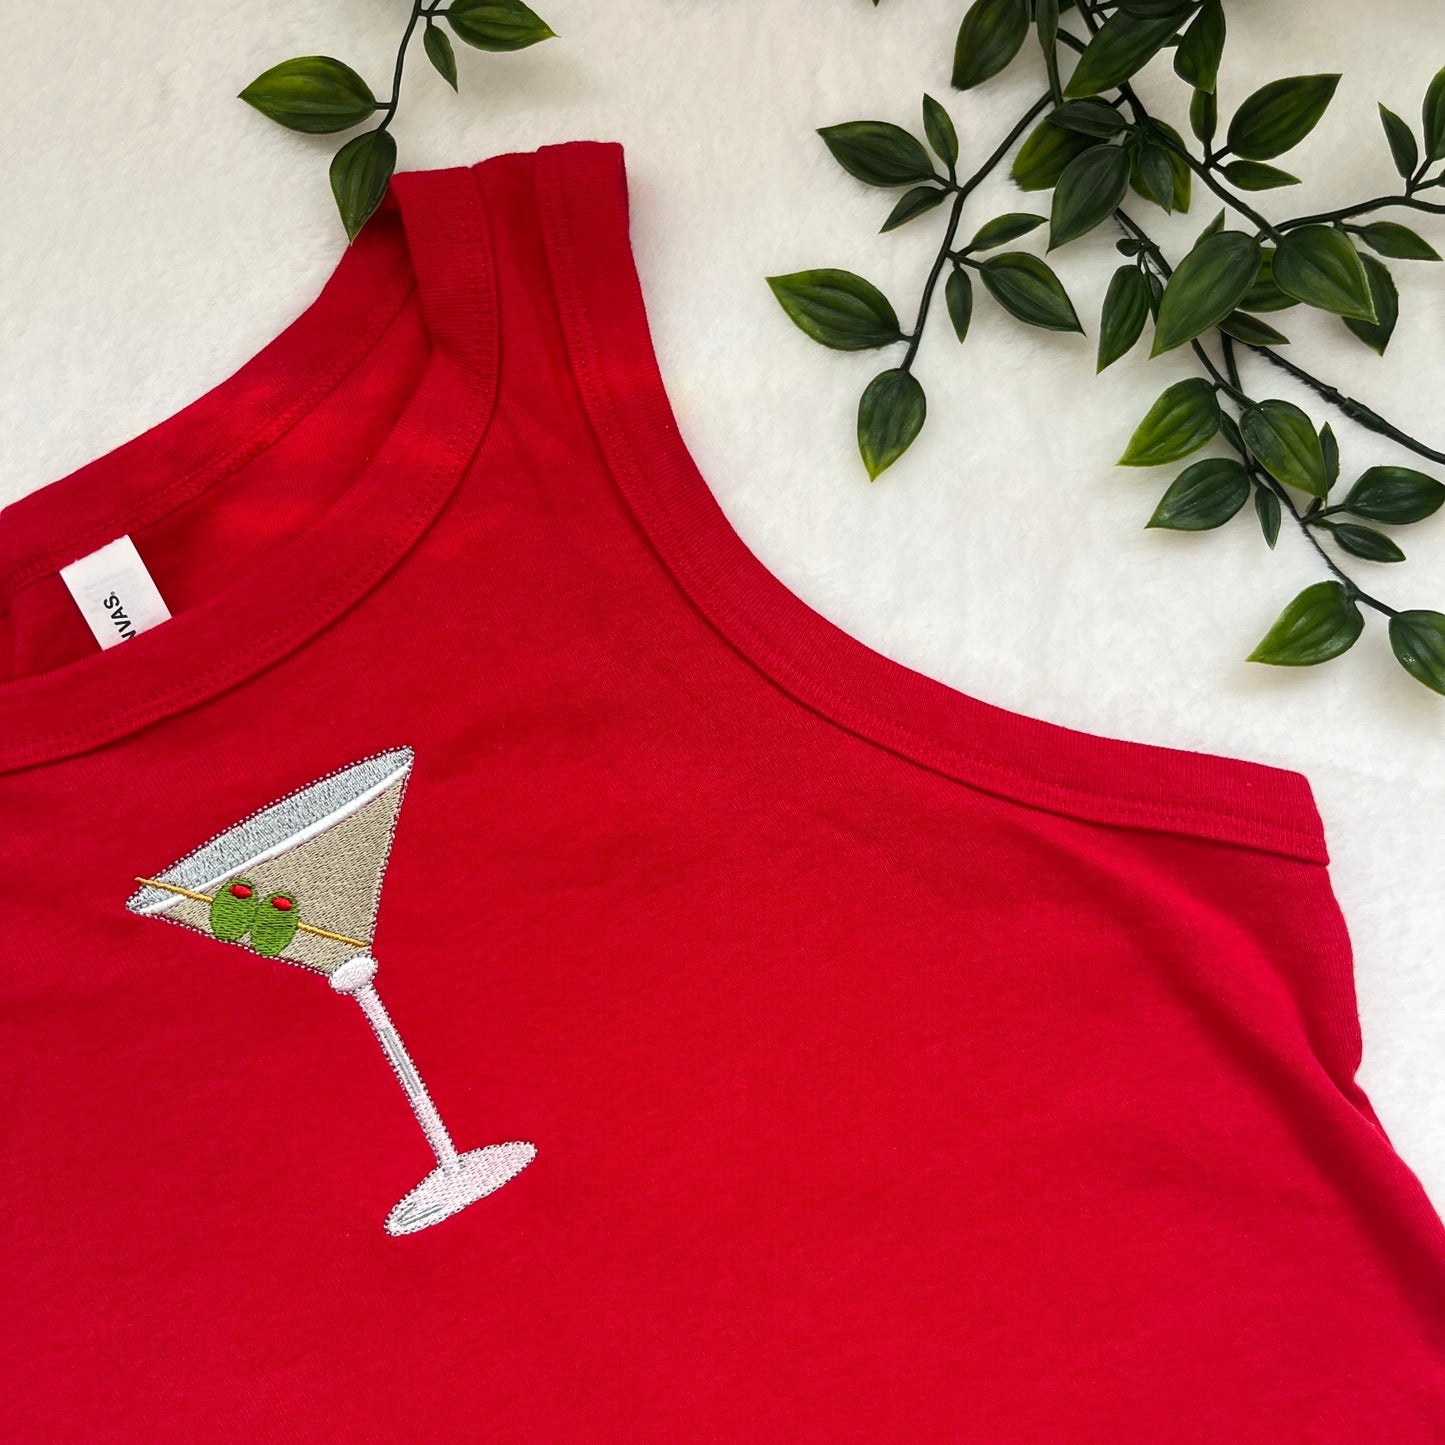 Dirty Martini Cocktail Embroidered Racer Tank Top